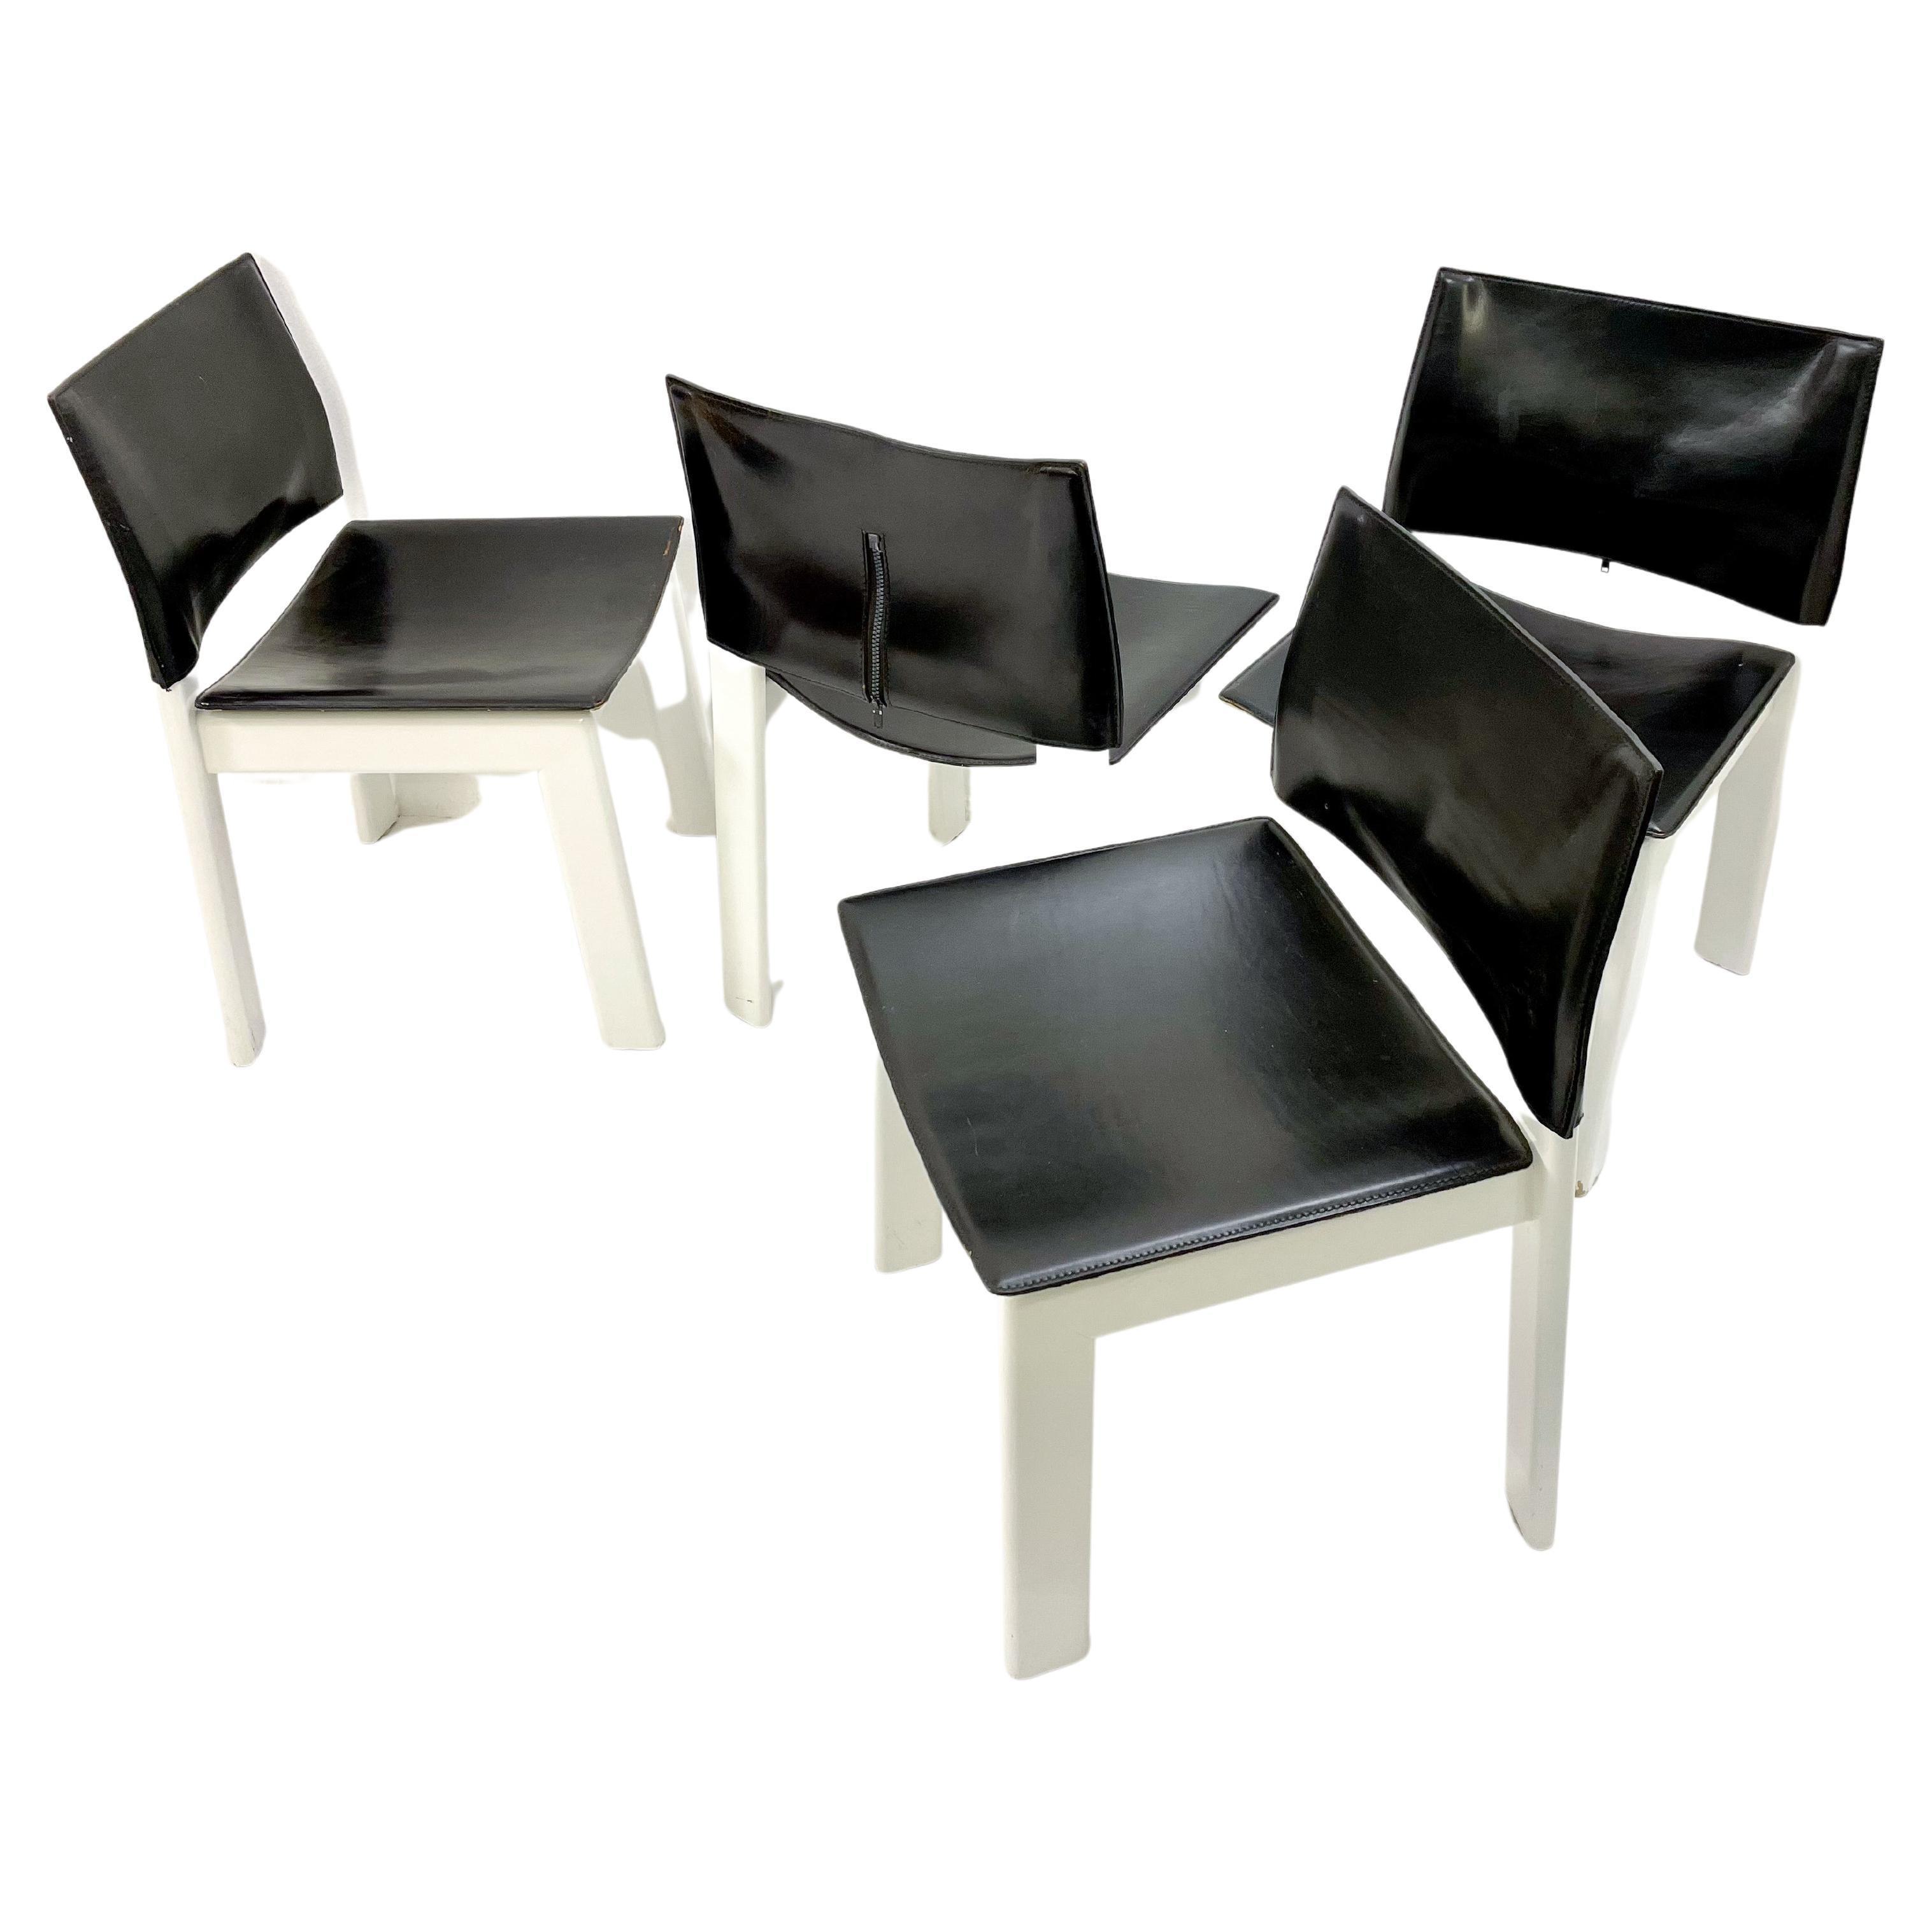 Mid-Century Modern Set of 4 Chairs, White Wood and Black Leather, Italy, 1970s For Sale